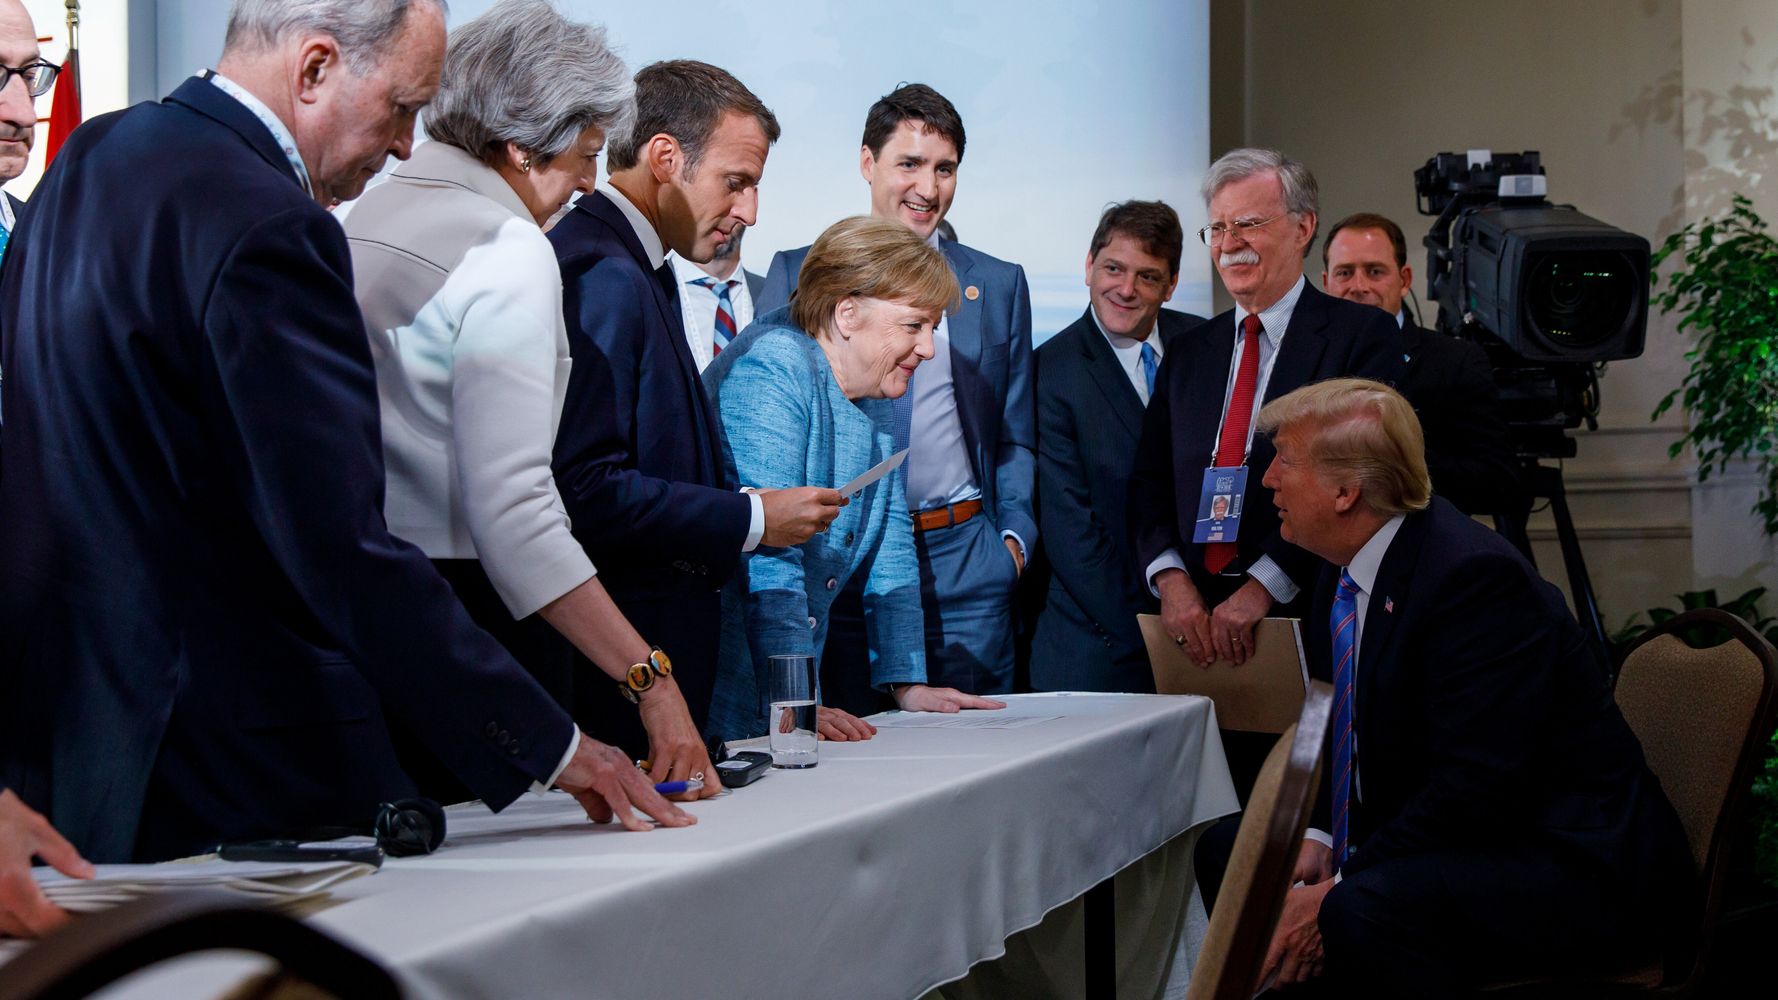 6 Different Views Of This G7 Meeting Paint A Tense Picture ...